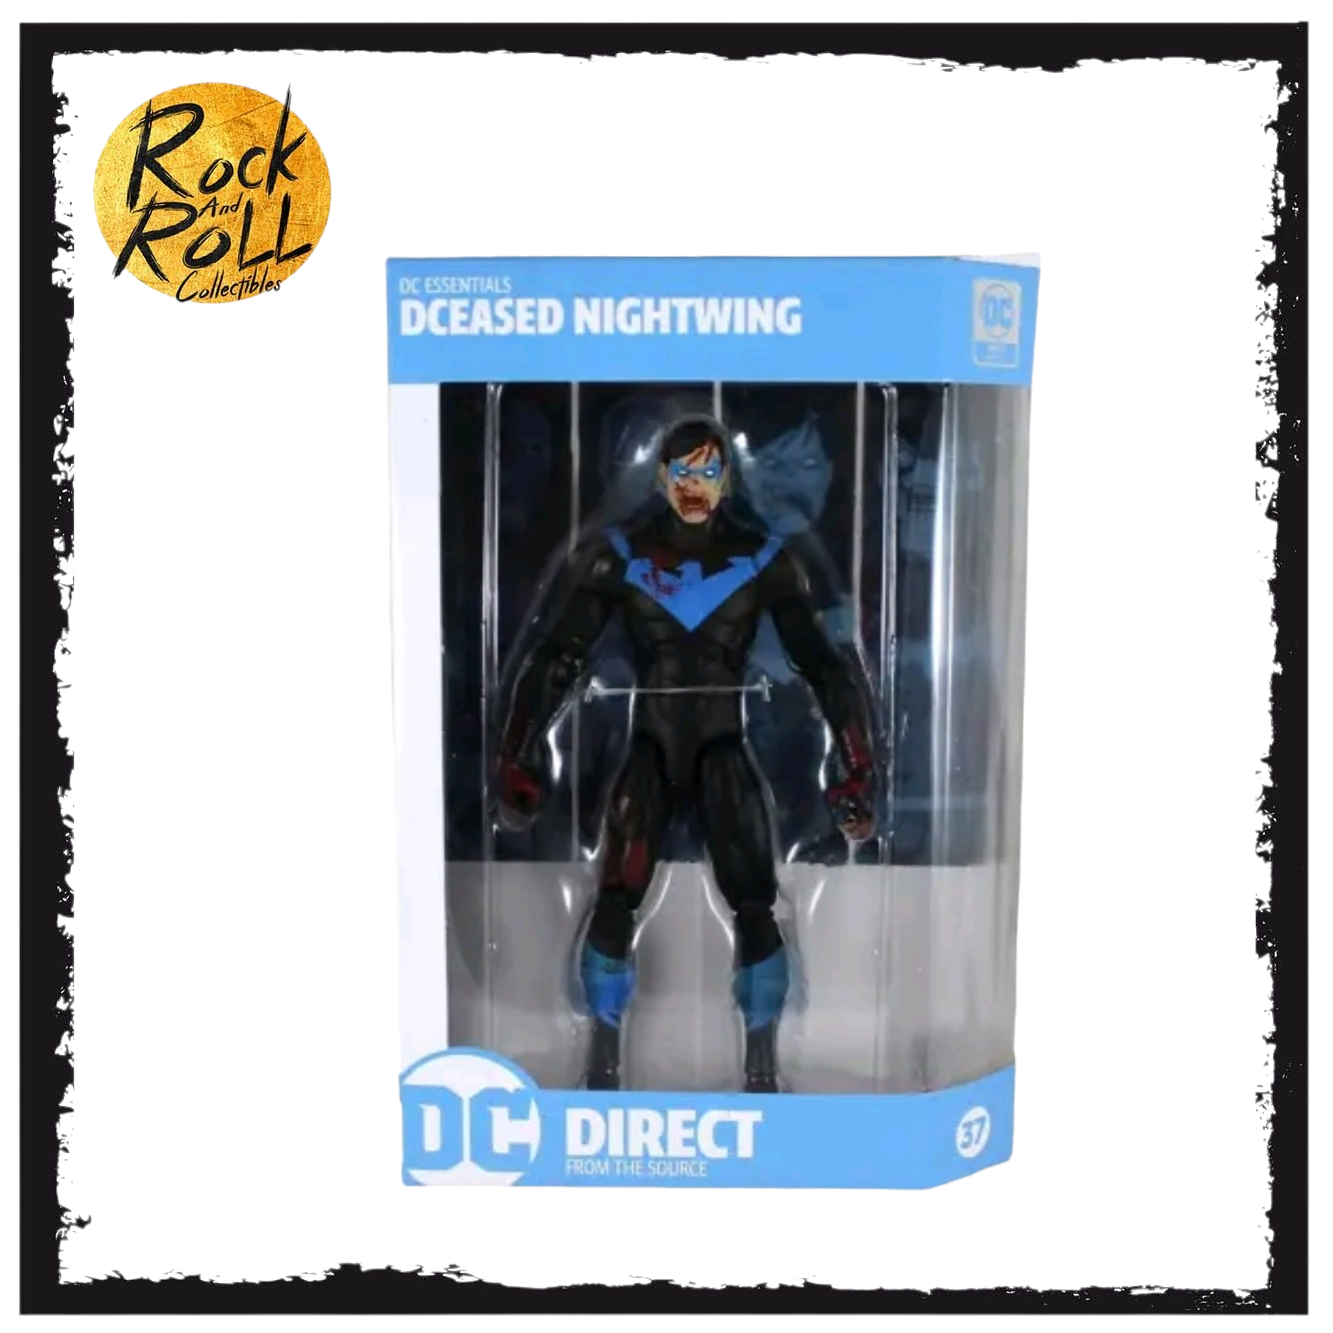 DC Direct DCeased Nightwing (DC Essentials) 7" Action Figure MCFARLANE TOYS